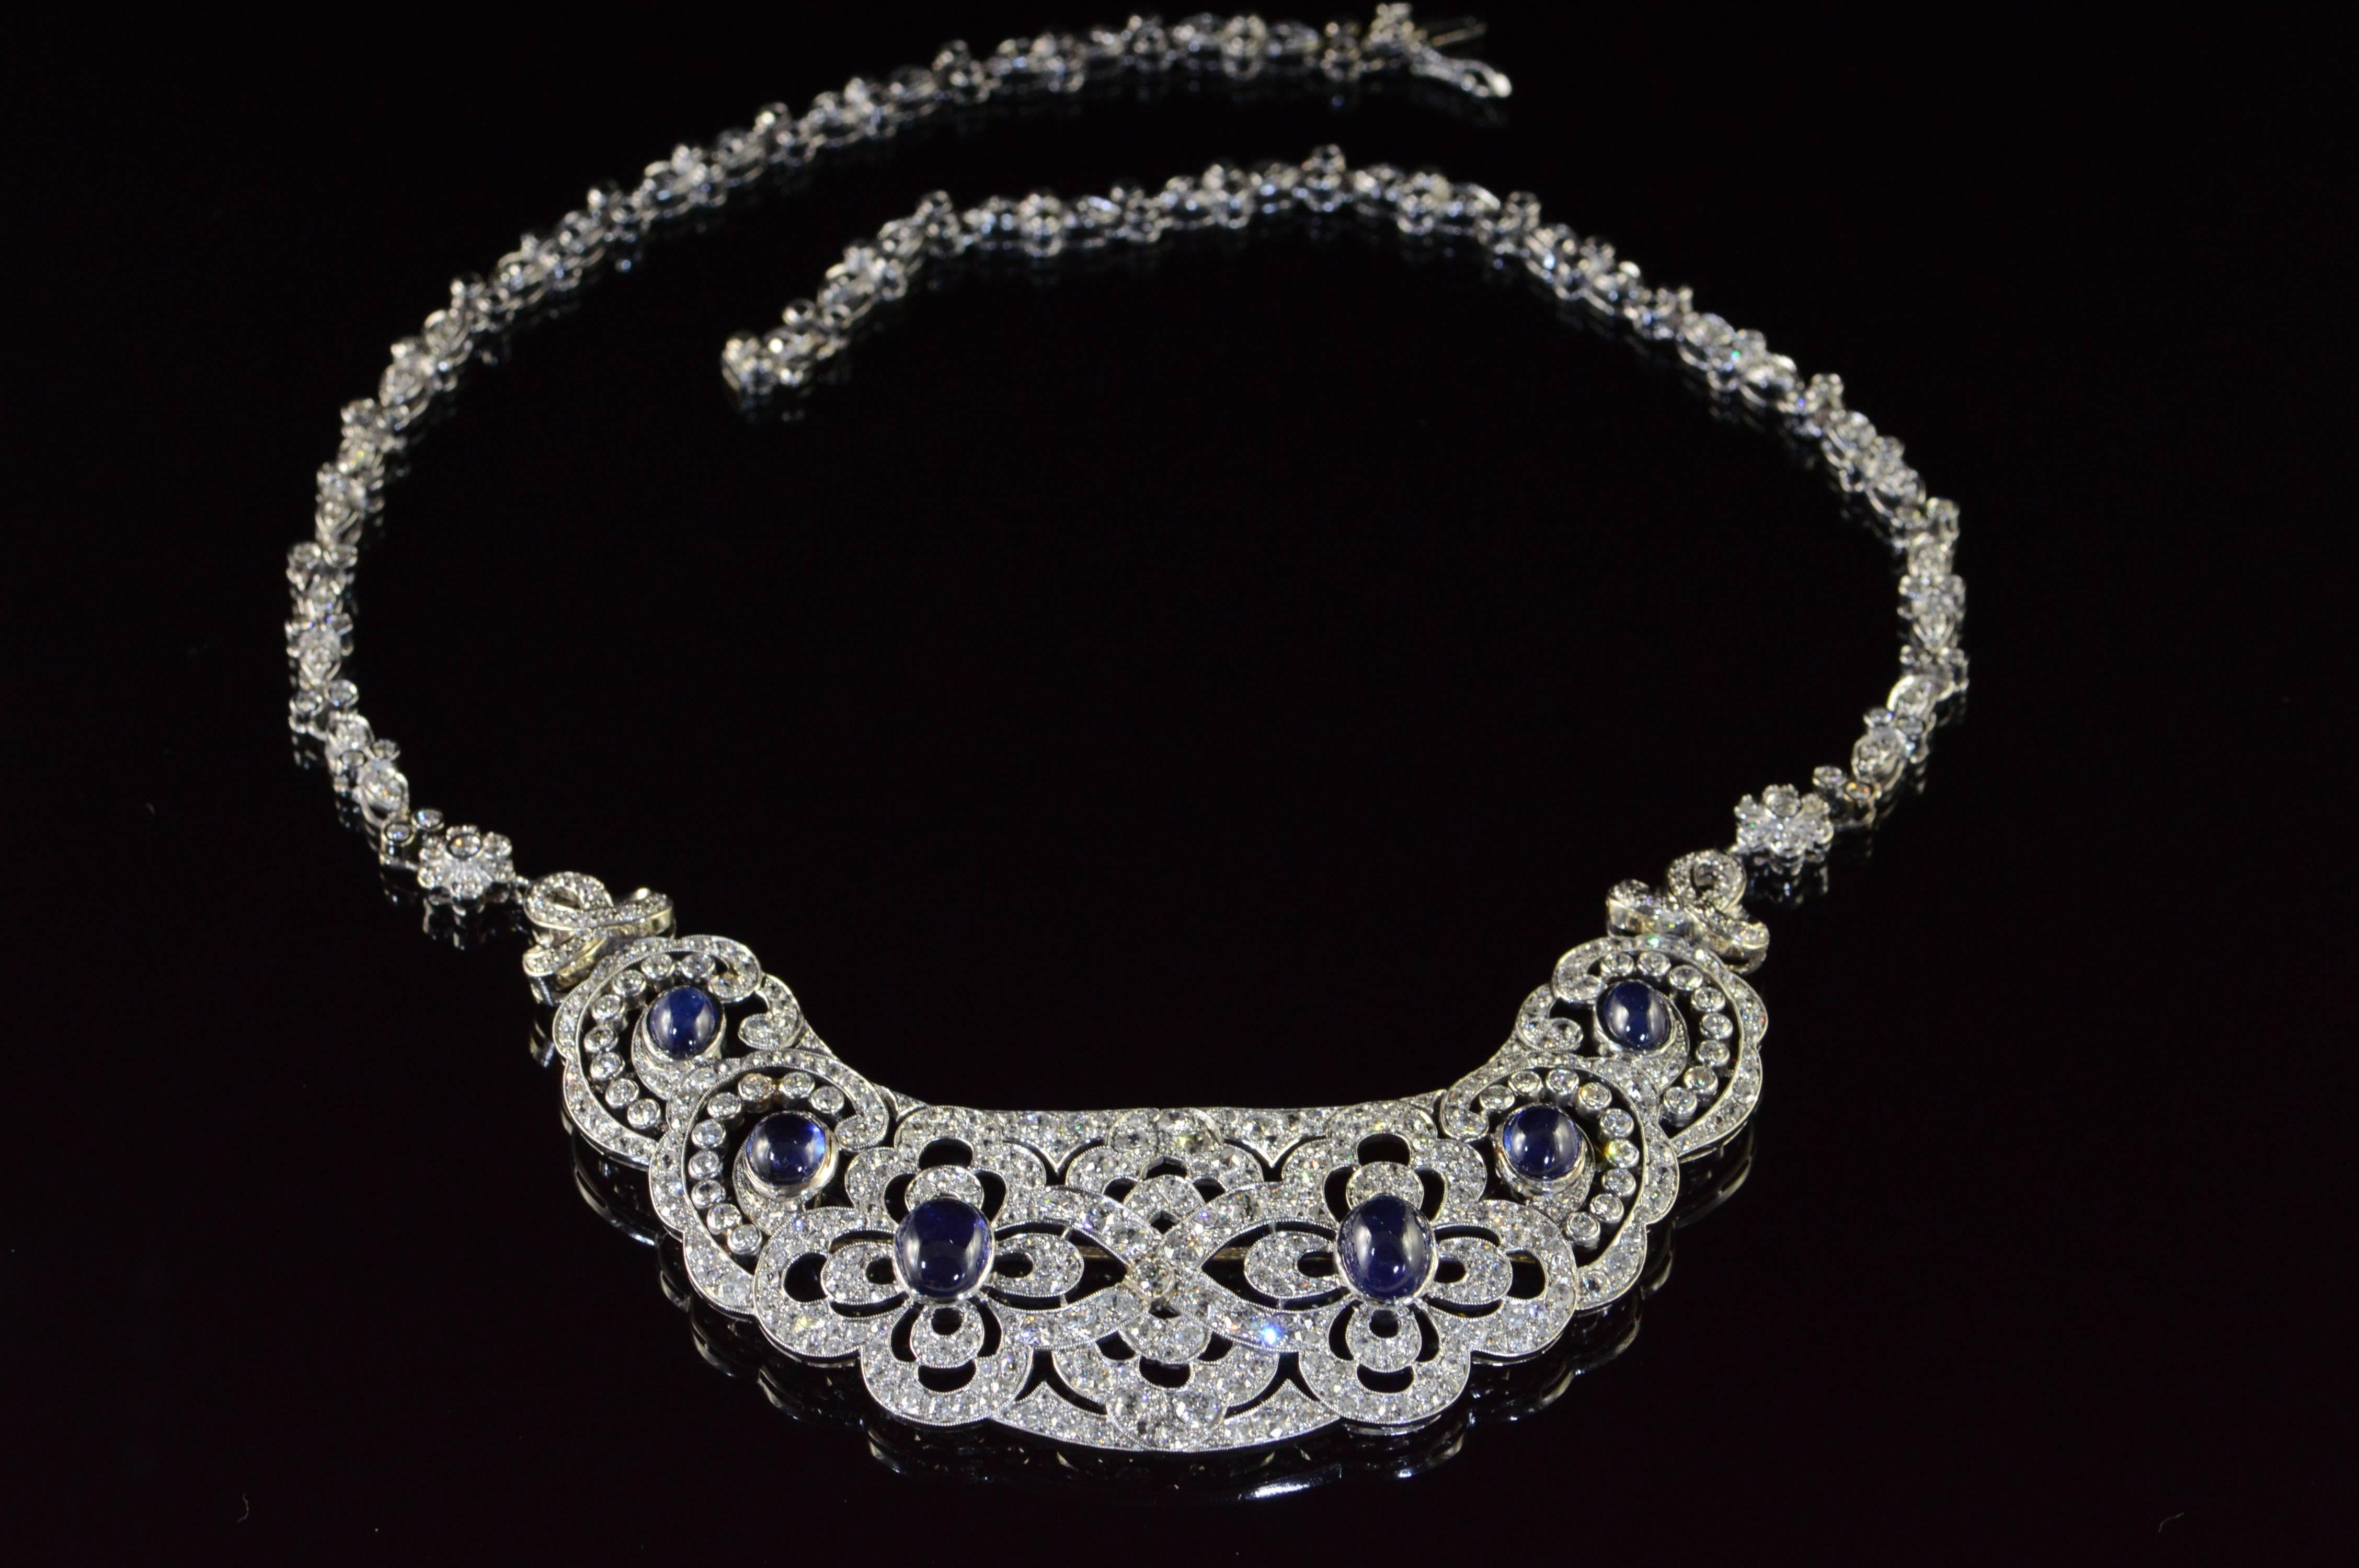 This beautiful “bib” style necklace was most likely a hair comb or hair piece that was at some point was altered by adding a custom styled chain. The base of the necklace is a fantastically styled Art Nouveau platinum piece with cabochon sapphires